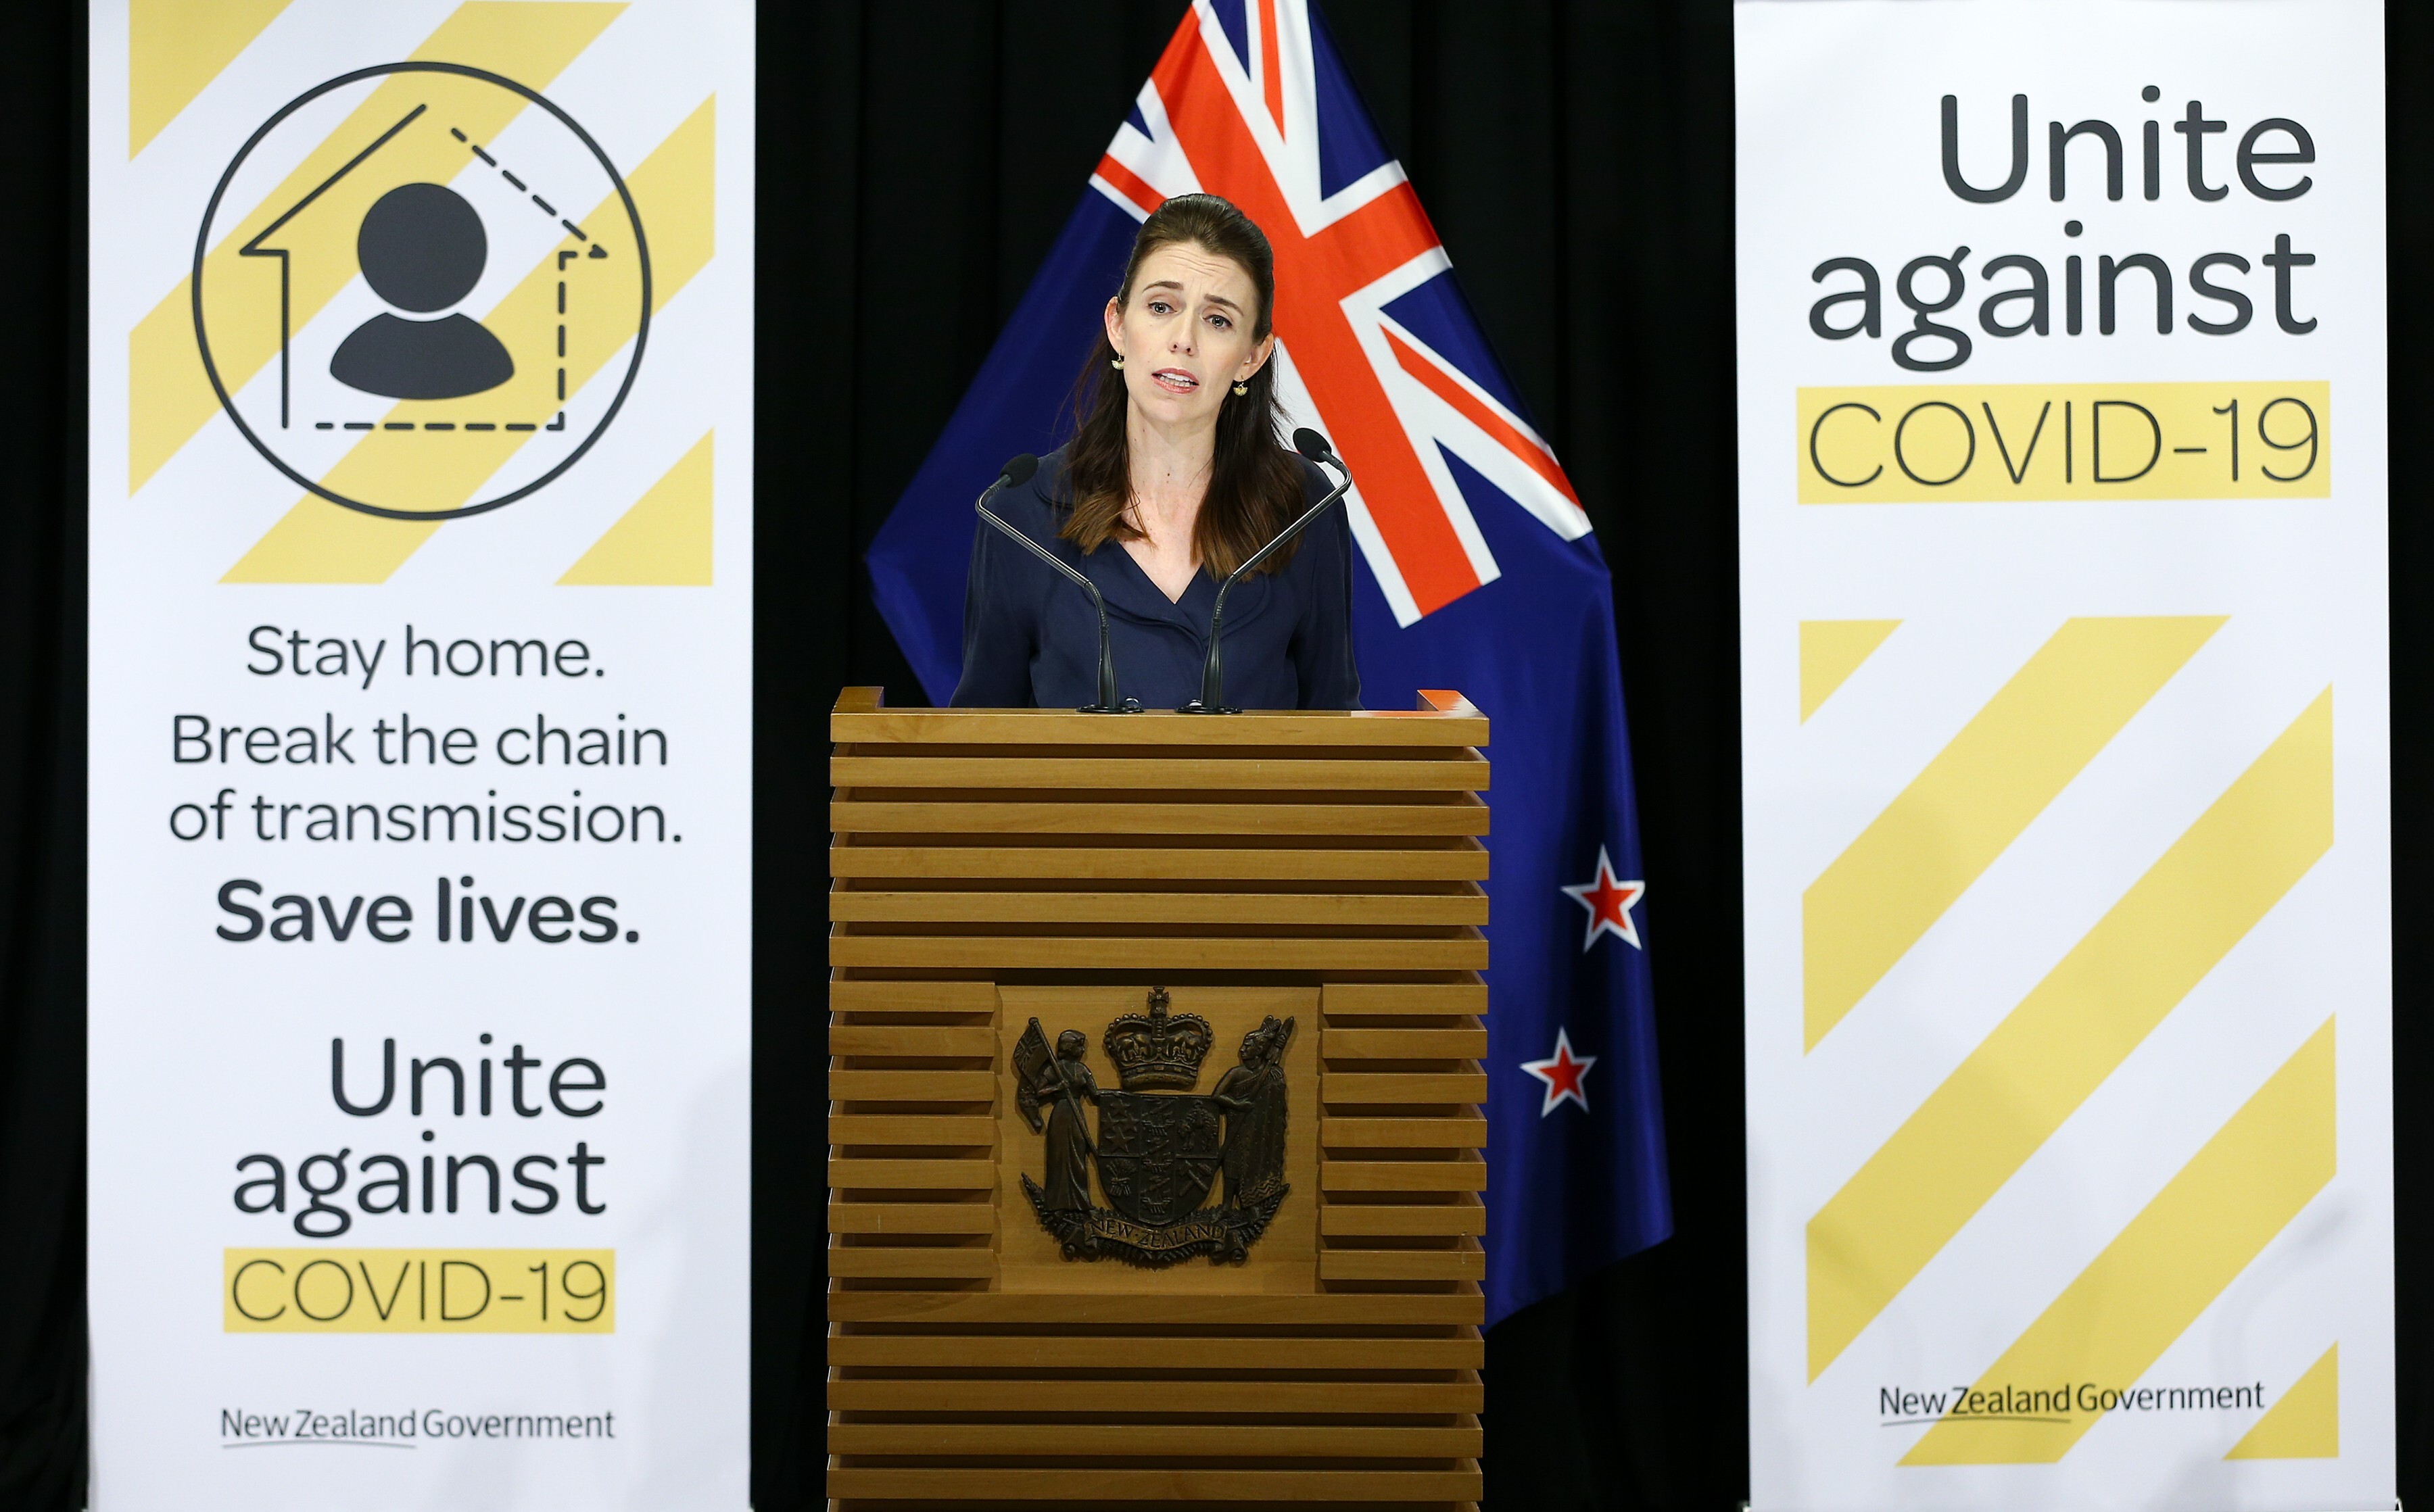 New Zealand’s Prime Minister Jacinda Ardern gives a Covid-19 update to media on April 5. Photo: Xinhua